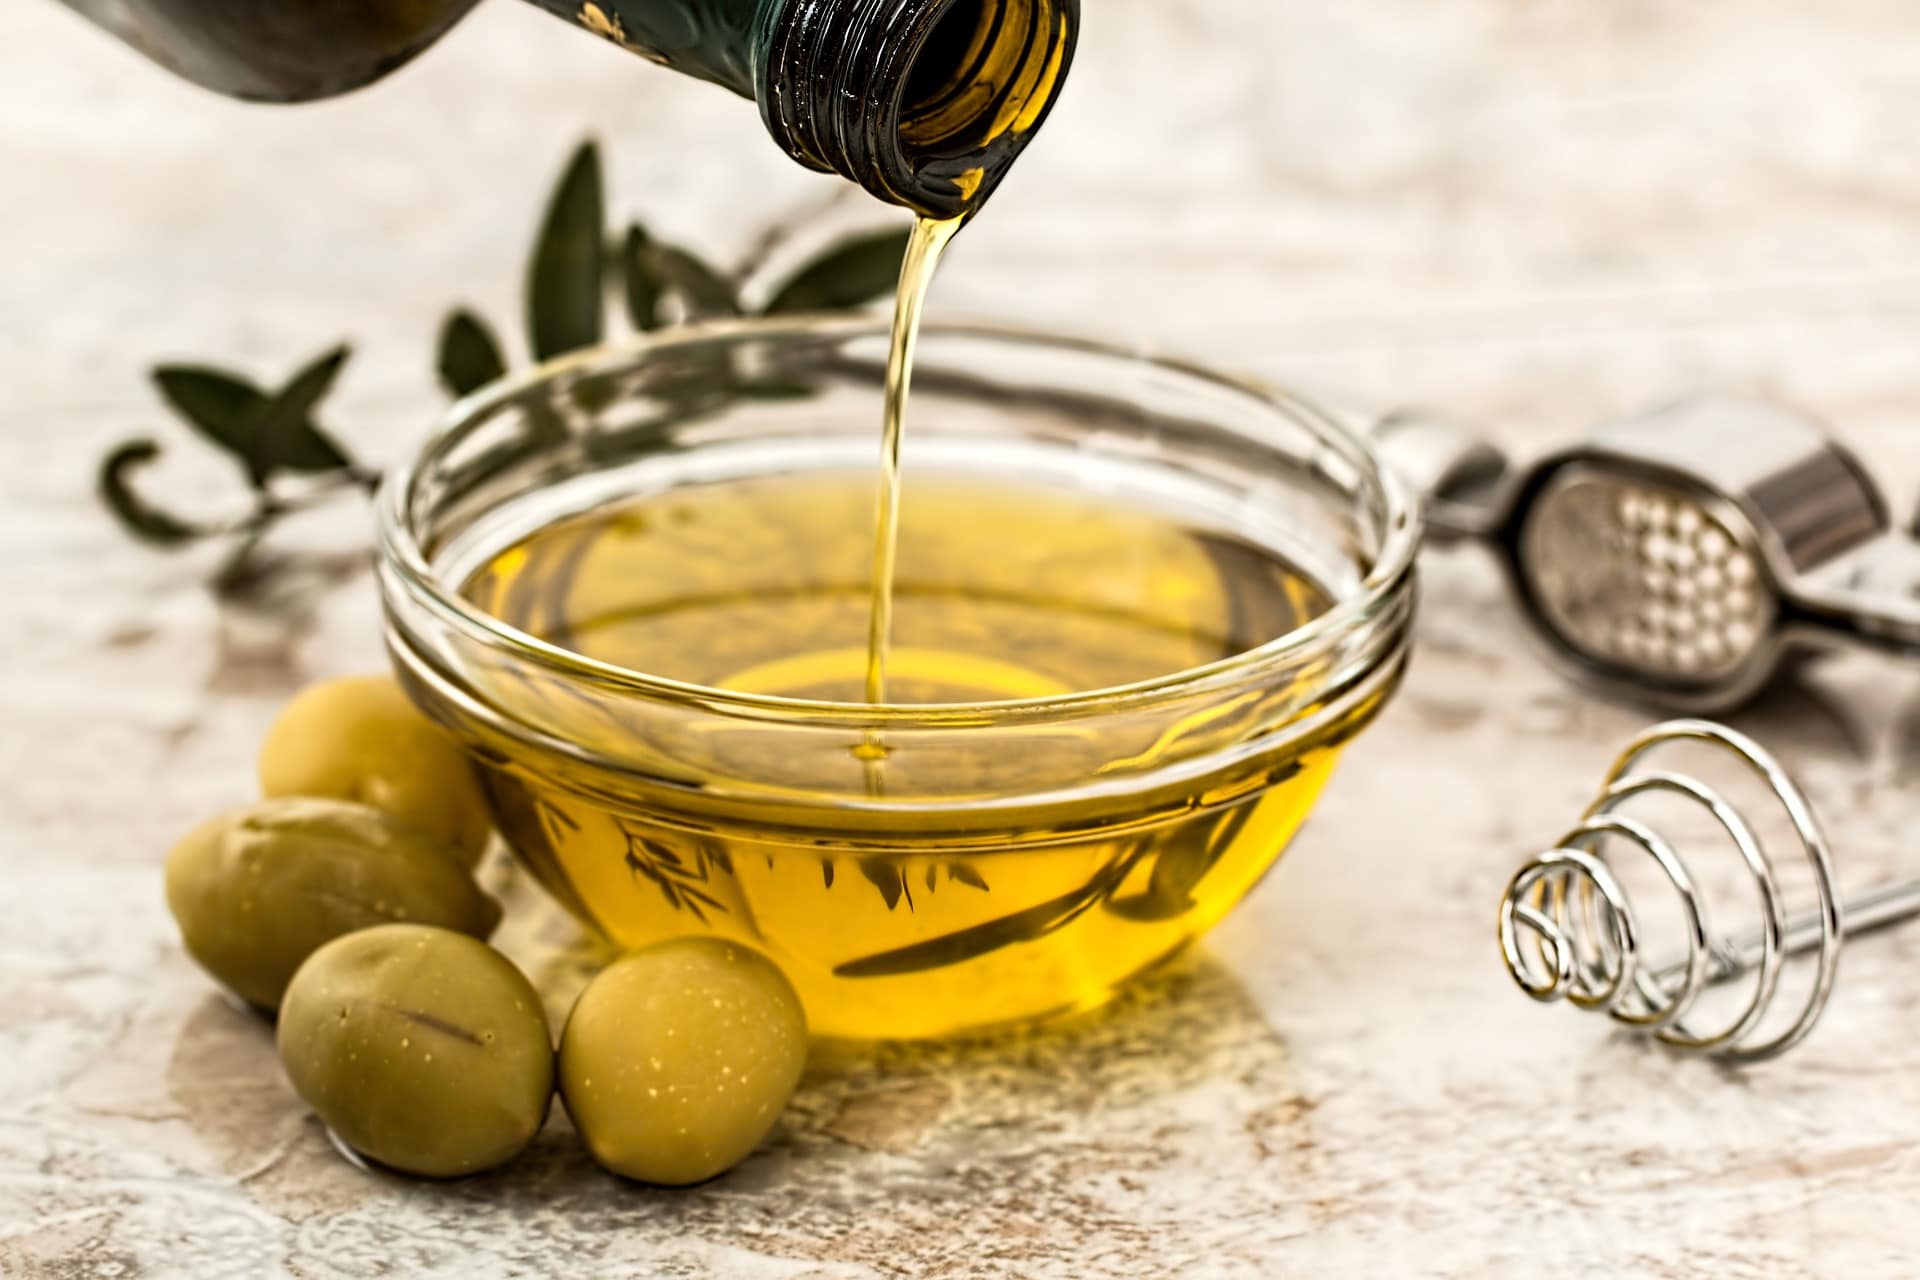 How to Make CBD Oil with Olive Oil